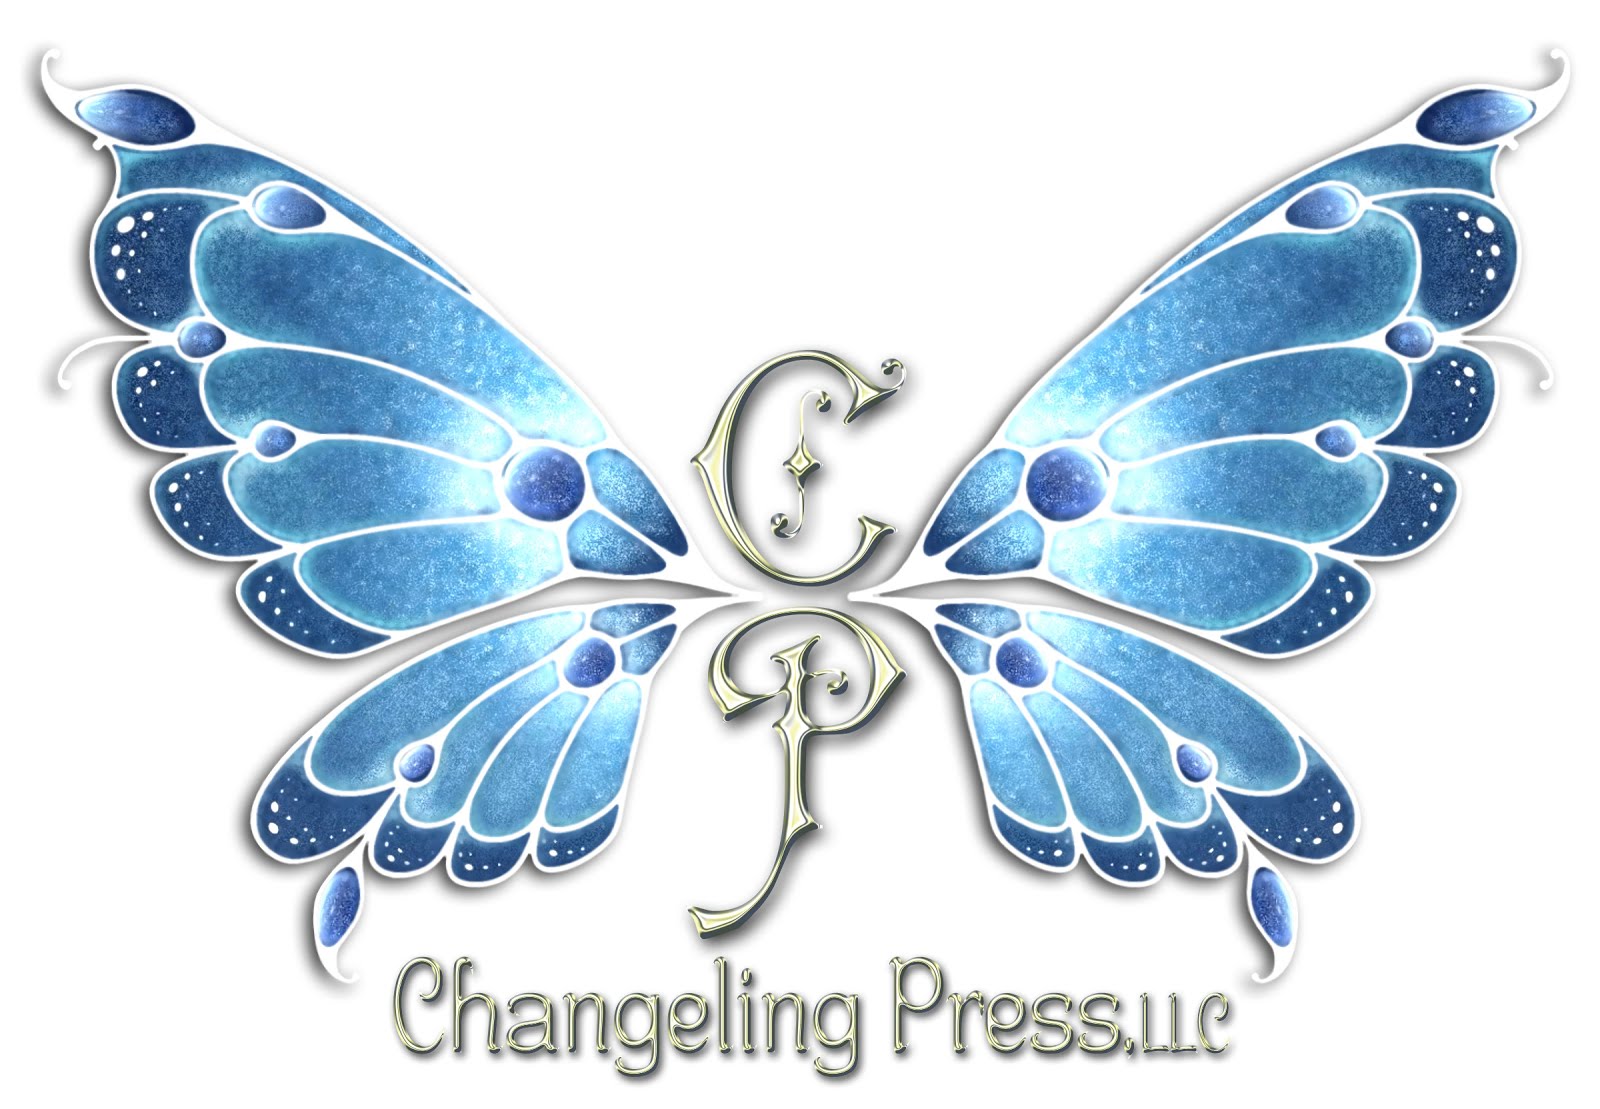 Find me at Changeling Press